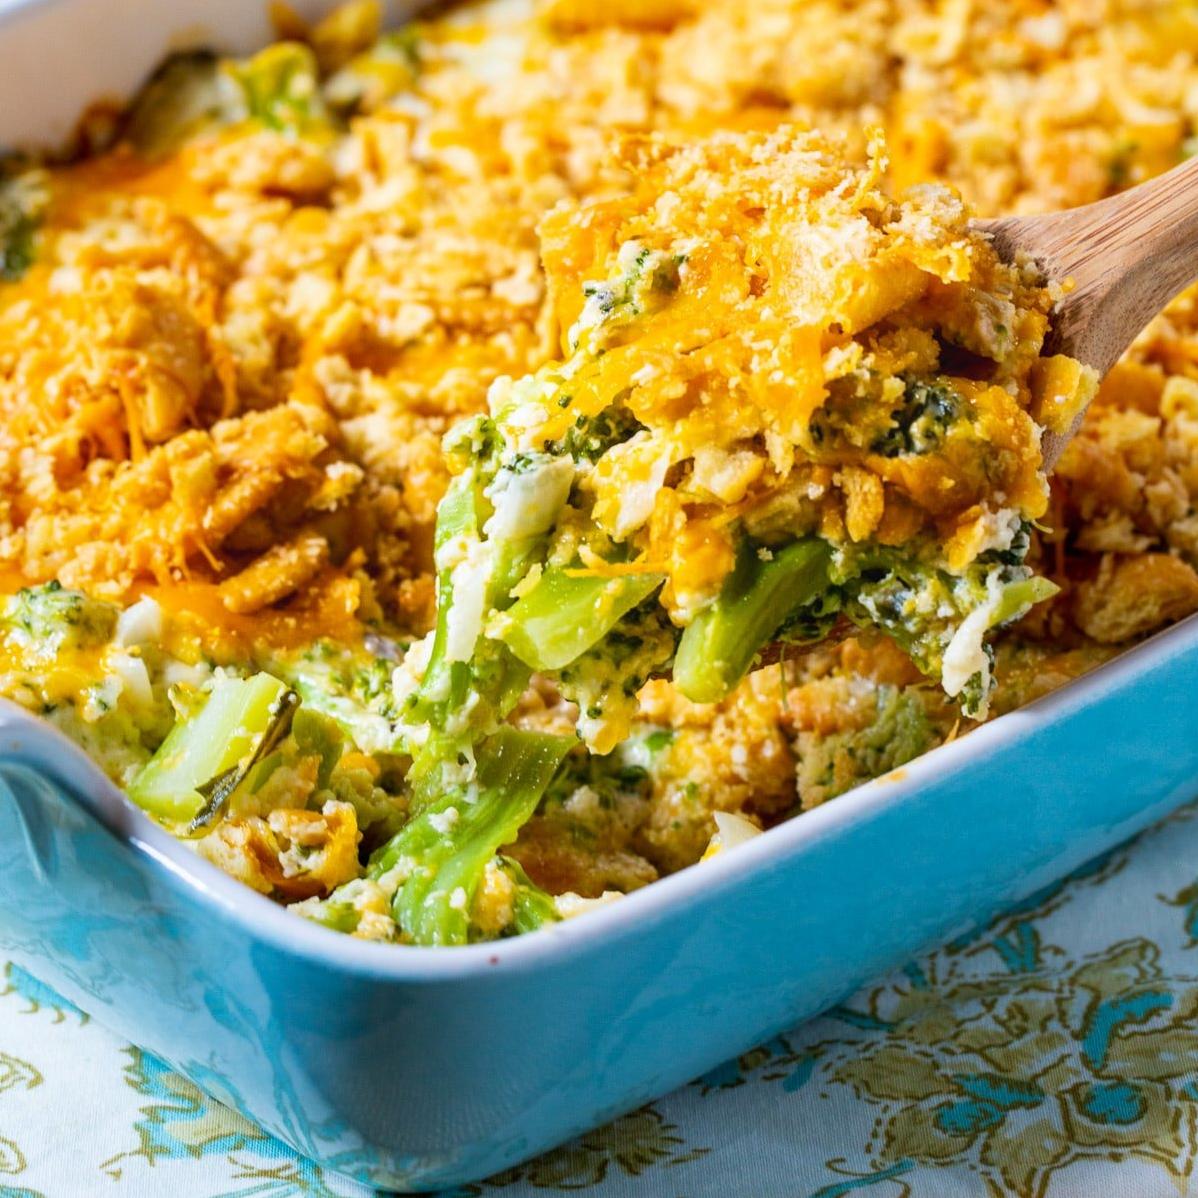  Melt-in-your-mouth broccoli covered in cheesy goodness